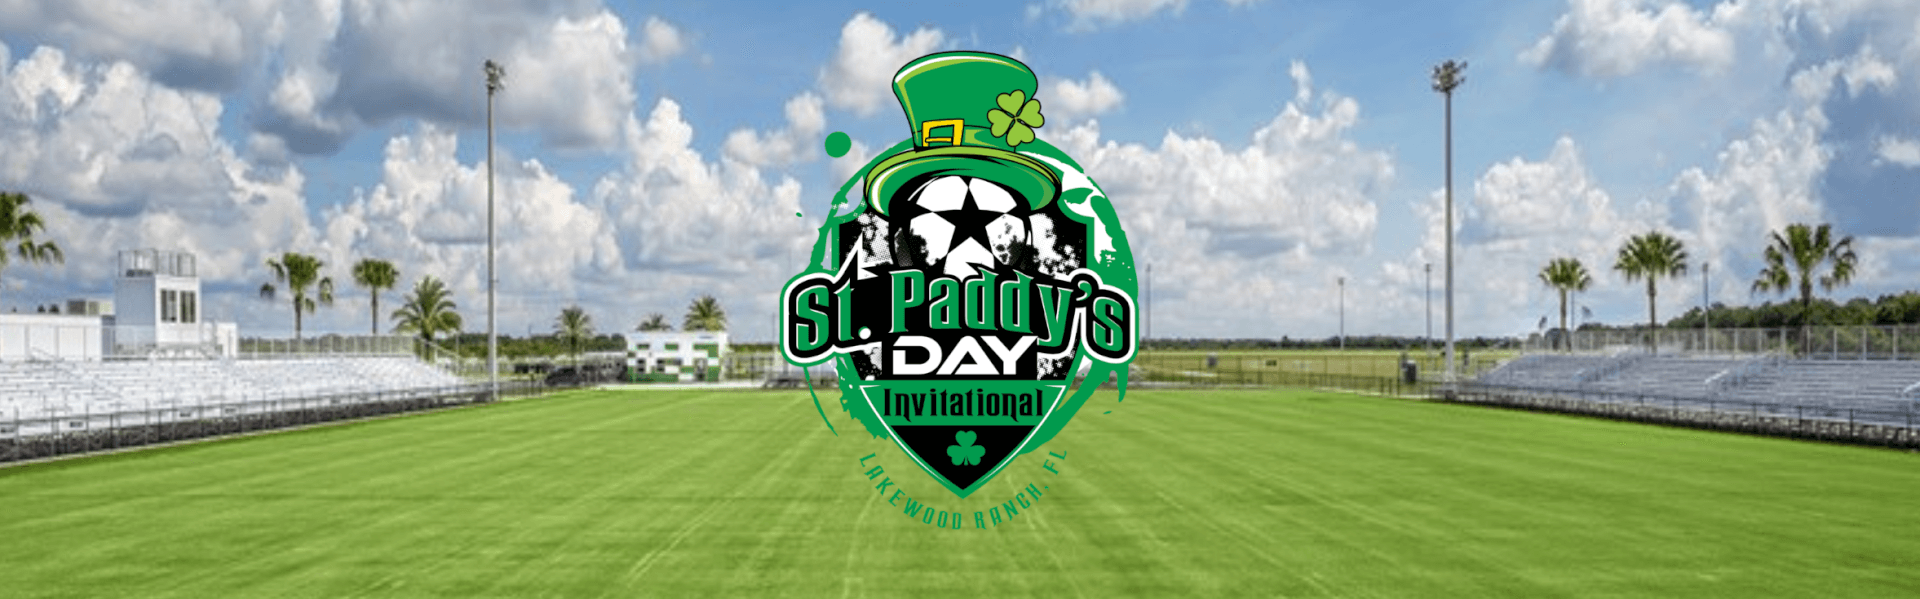 St. Paddy's Day Invitational Logo over image of Premier Sports Campus